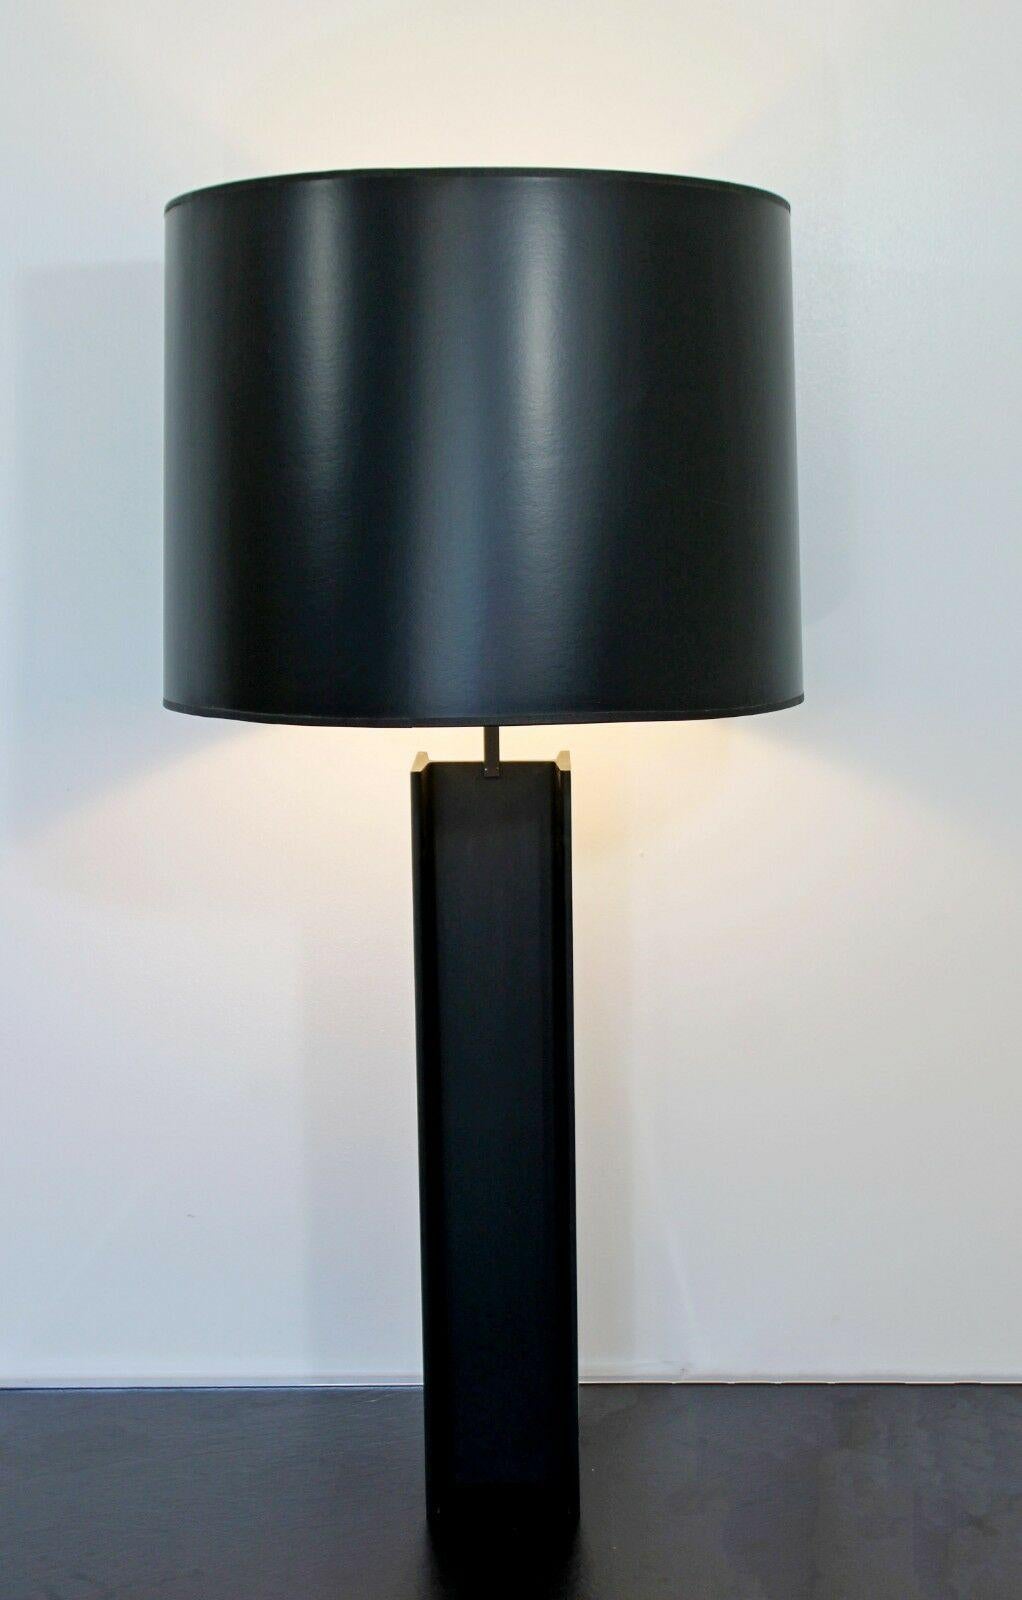 For your consideration is a phenomenal pair of I beam shaped, chrome and black metal, table lamps, with original shades and chrome finials, by Laurel Lamp Co, circa the 1970s. In excellent condition. The dimensions of the lamps are 5